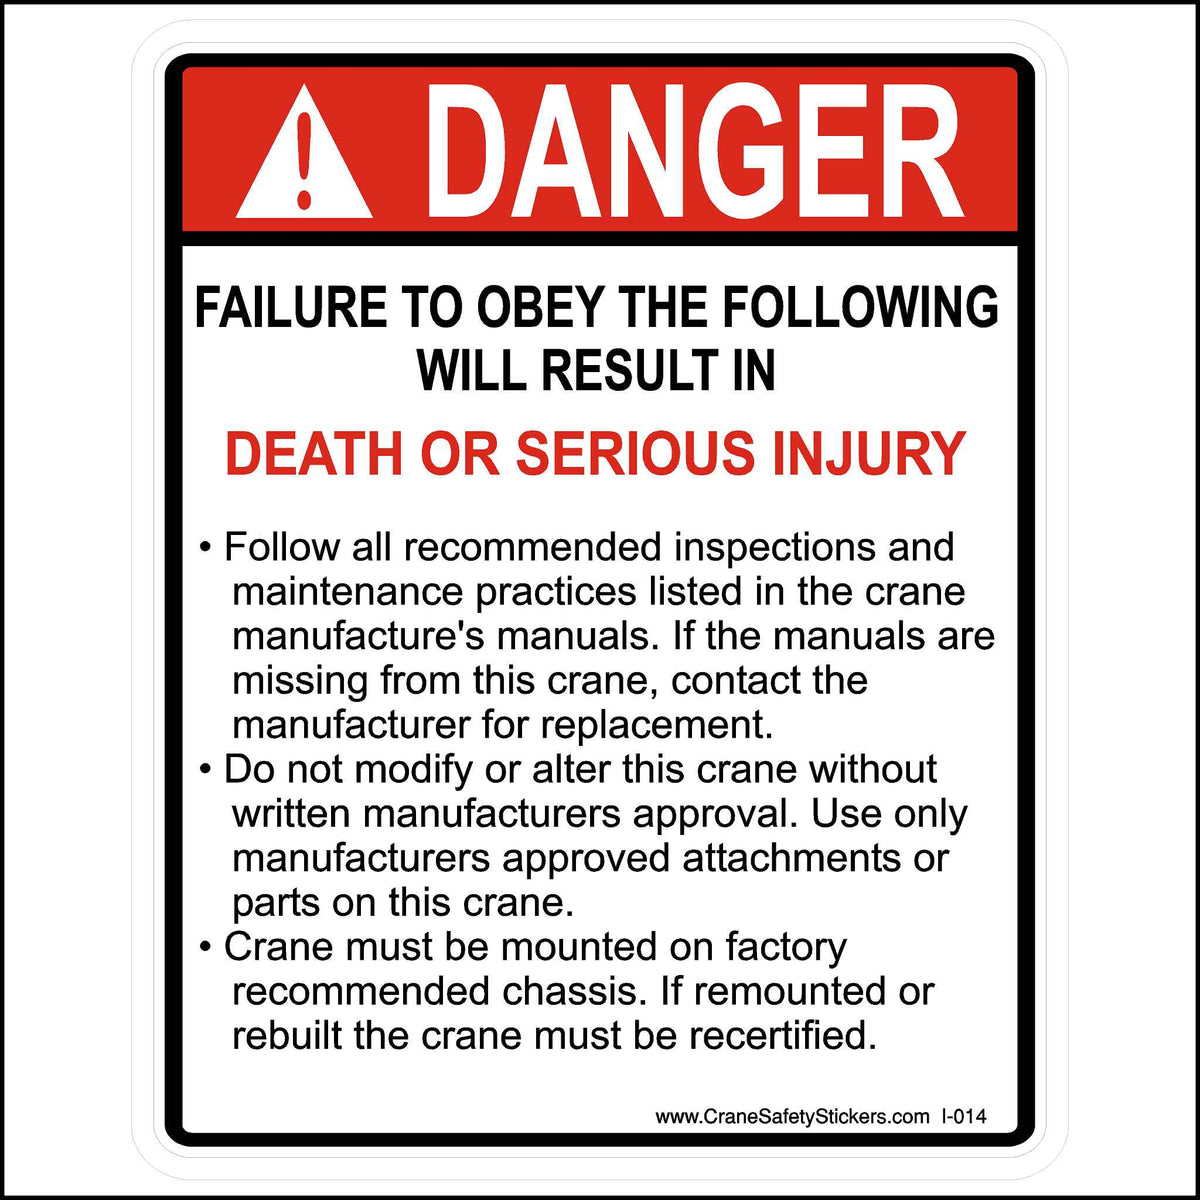 Our Failure To Obey The Following Rules Sticker is Printed With. DANGER Failure to obey the following will result in death or serious injury. • Follow all recommended inspections and maintenance practices listed in the crane manufacture&#39;s manuals. If the manuals are missing from this crane, contact the manufacturer for replacement.